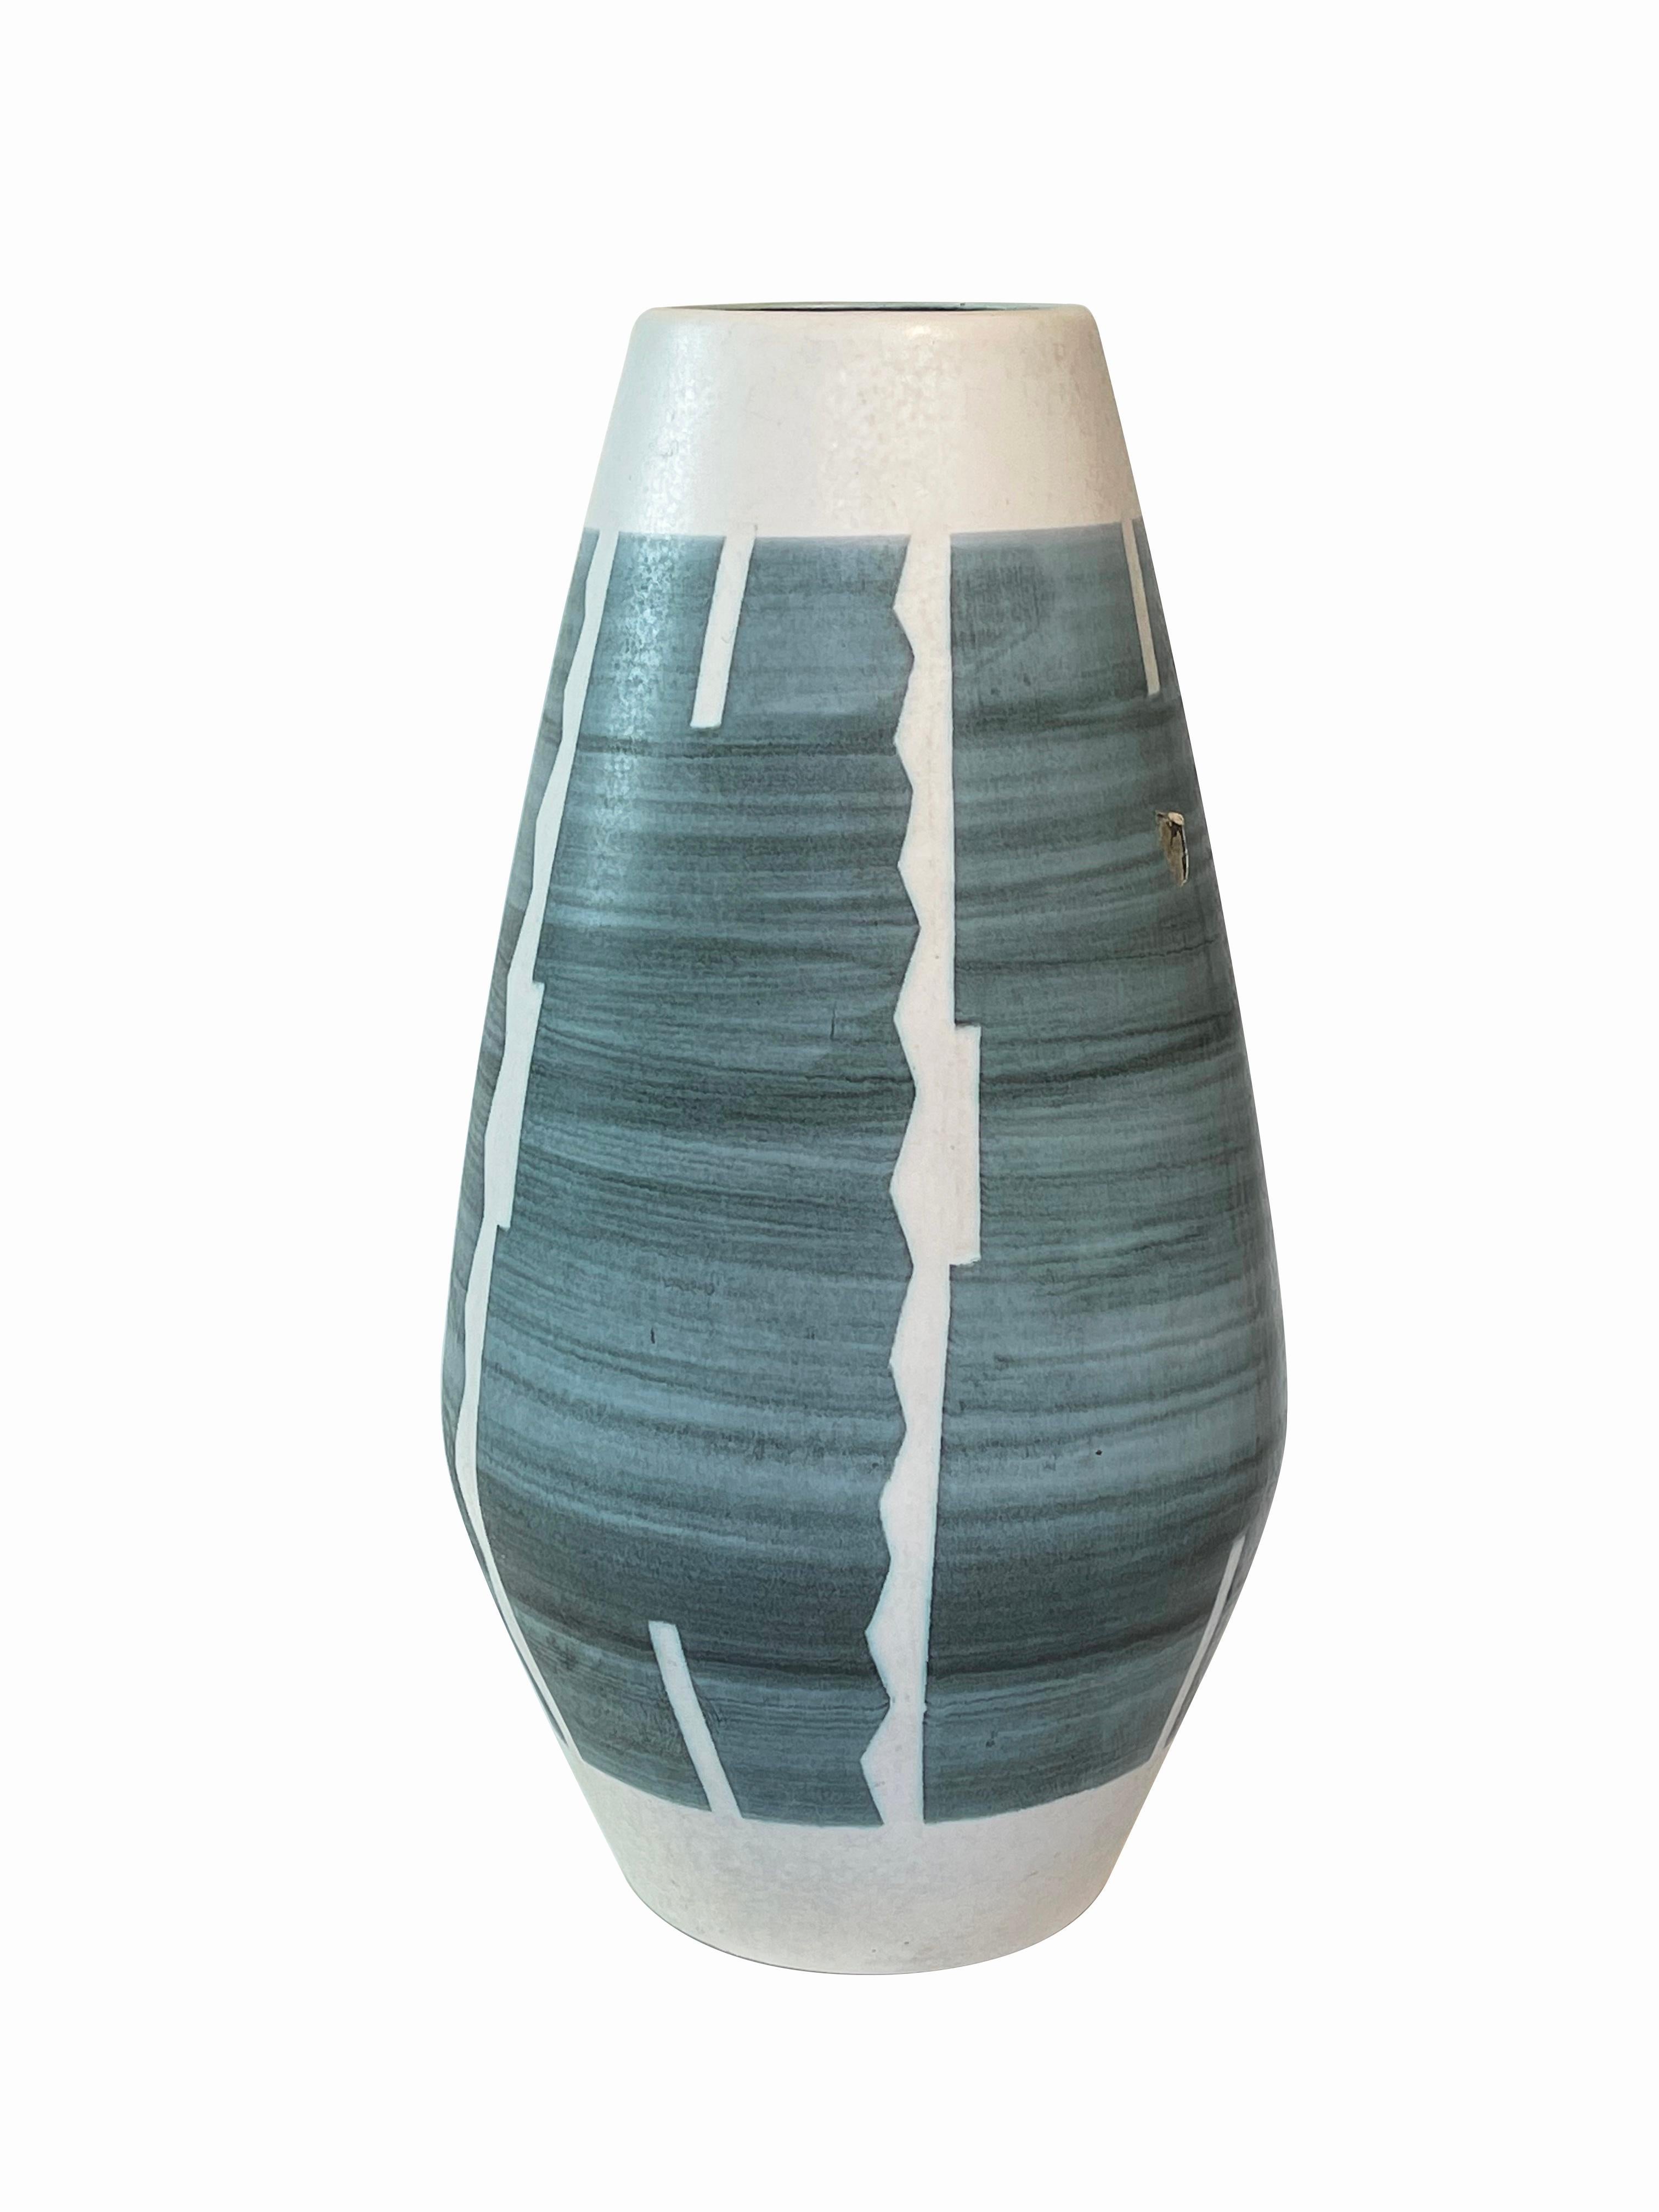 Large Modernist Ethnic Type West German Floor Vase by Fohr Pottery, circa 1965 In Good Condition For Sale In Andernach, DE